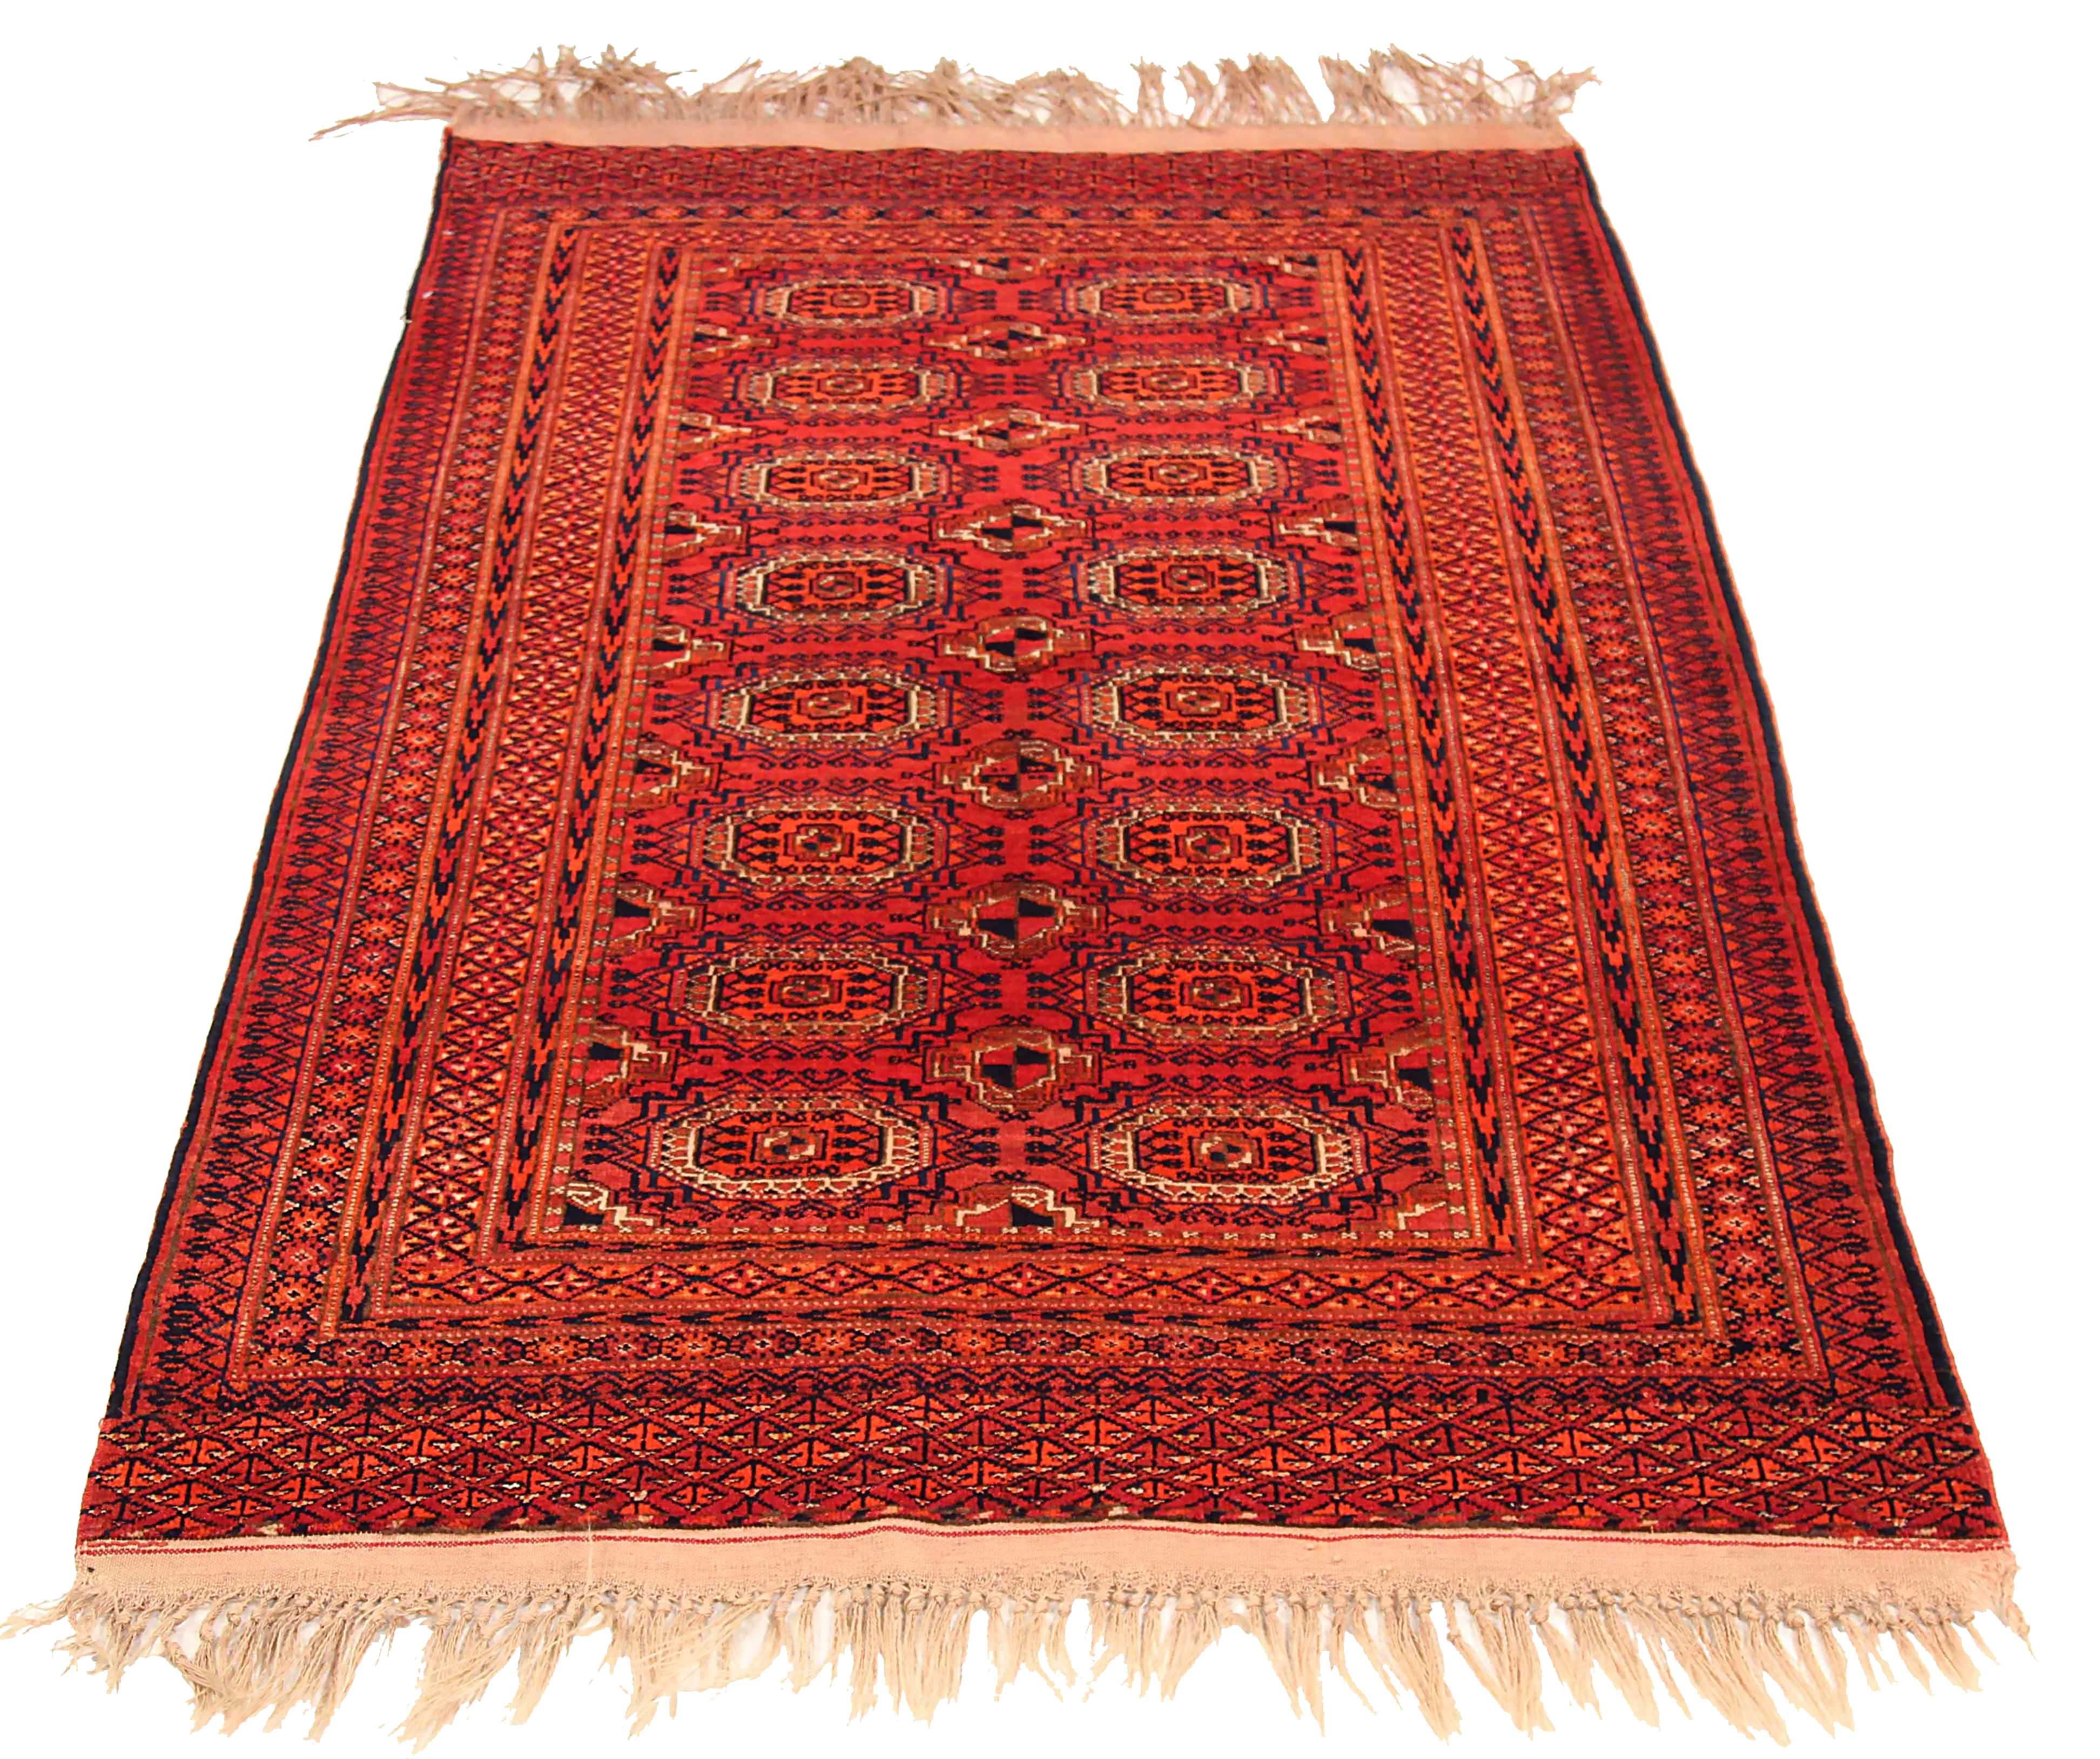 Antique Persian area rug handwoven from the finest sheep’s wool. It’s colored with all-natural vegetable dyes that are safe for humans and pets. It’s a traditional Turkish design handwoven by expert artisans. It’s a lovely area rug that can be